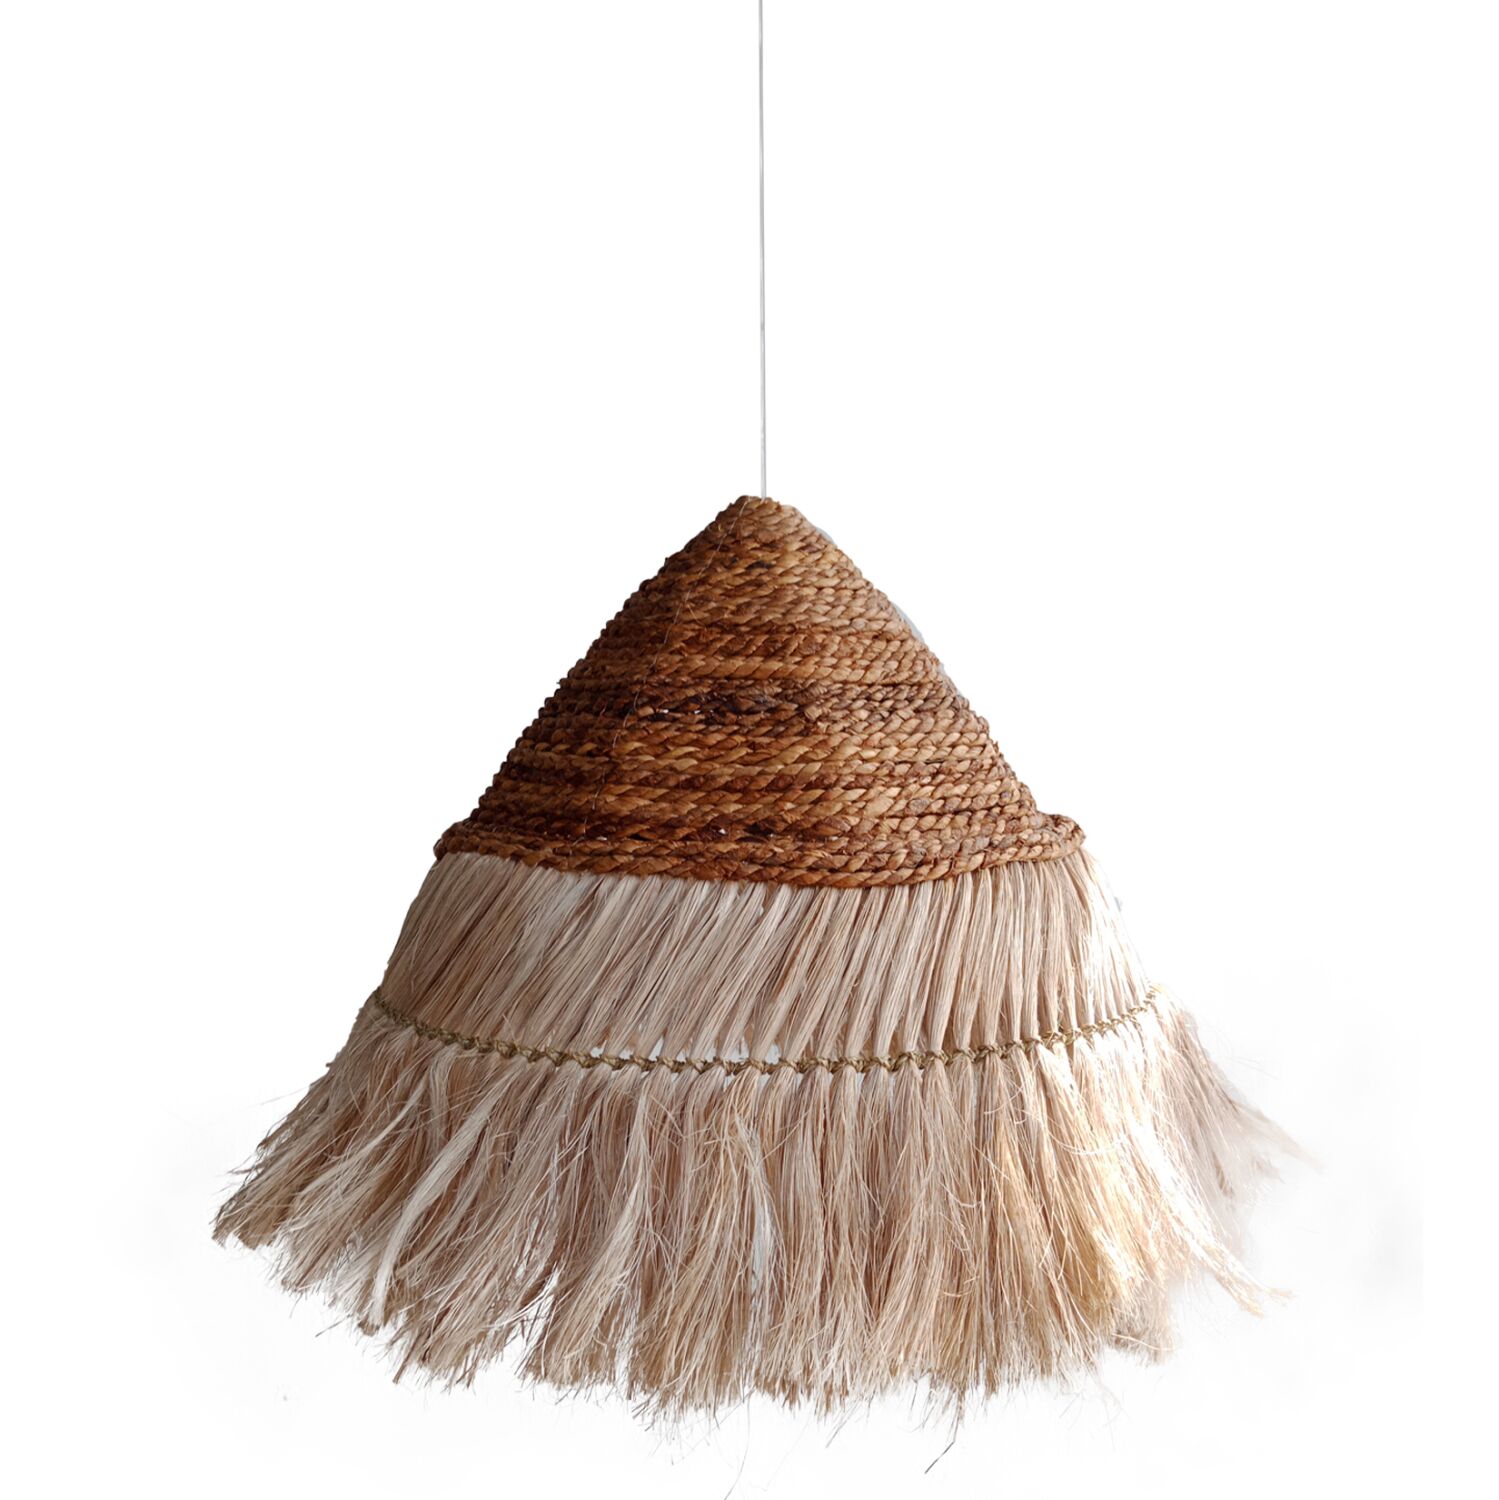 CEILING PENDANT ROUND PYRAMID CAP MADE OF ABACA FIBERS IN NATURAL COLOR 50x50x35Hcm.HM7762